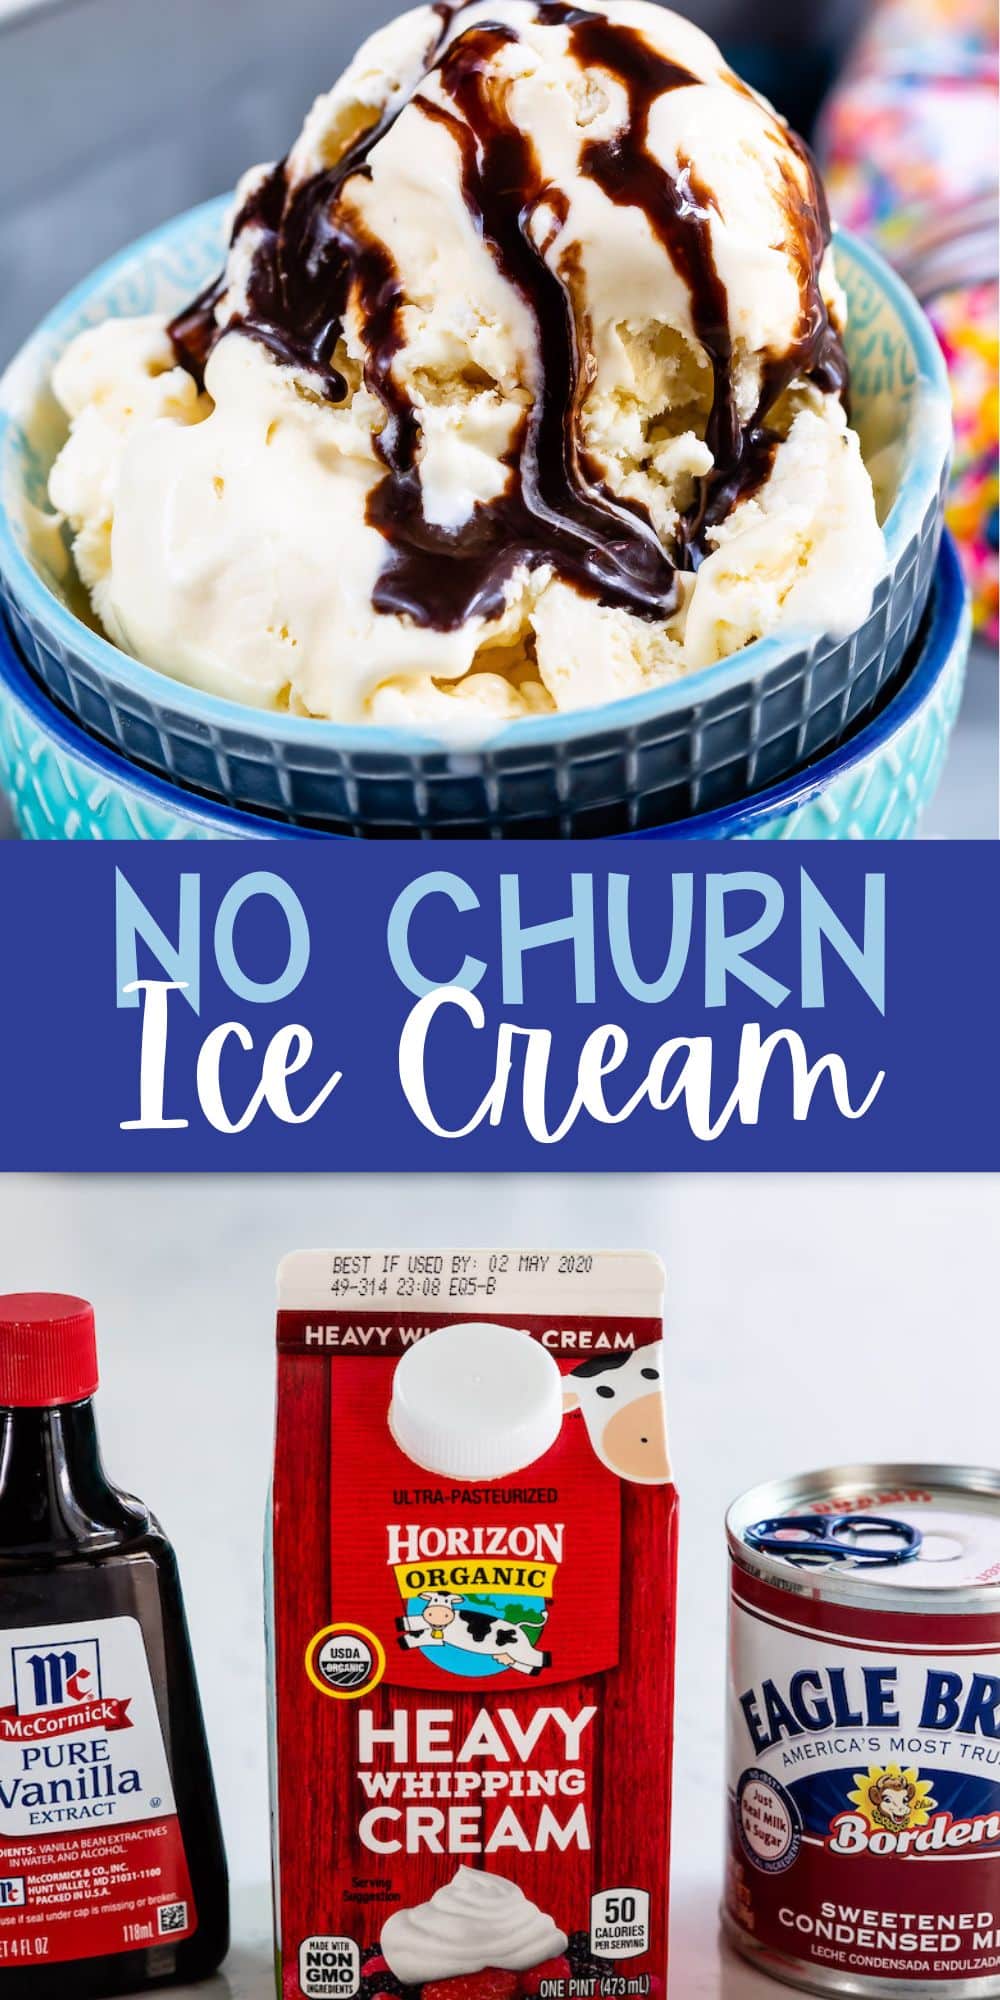 two images of ice cream in blue bowls with chocolate sauce drizzled over the ice cream with words on the image.